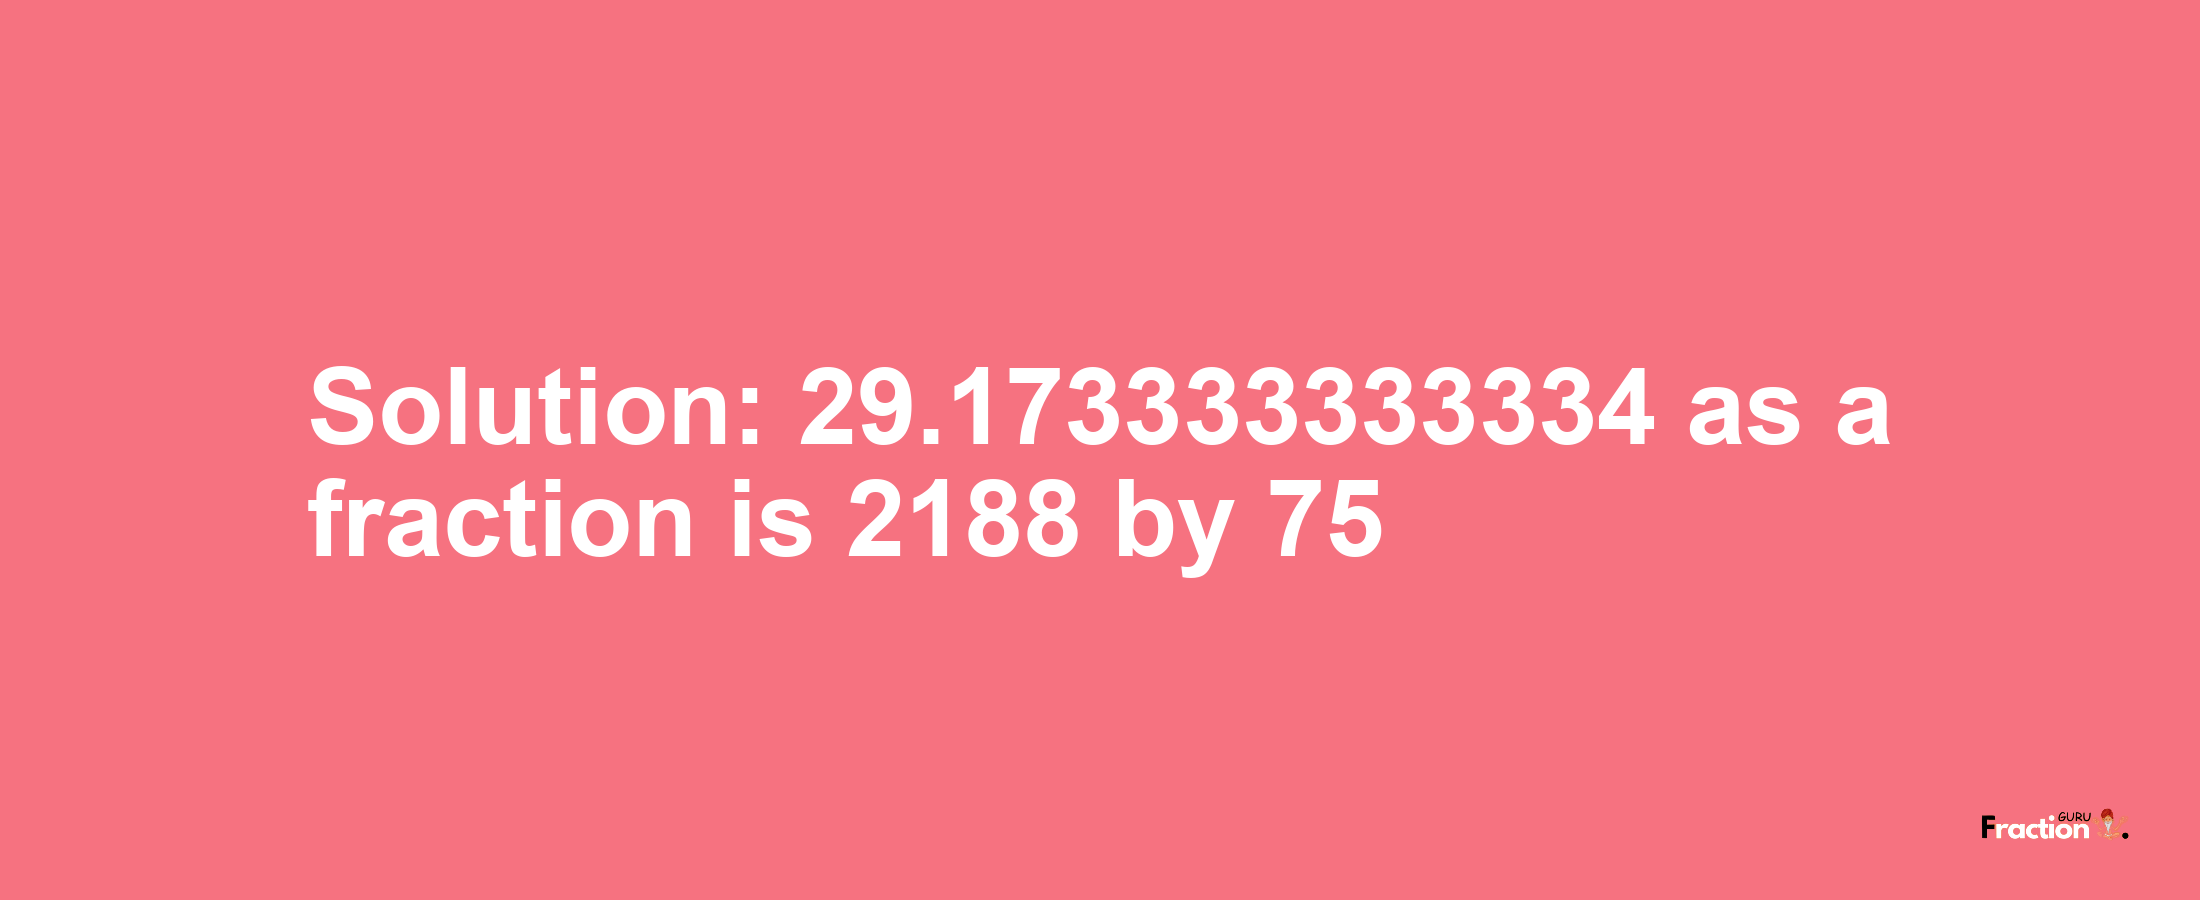 Solution:29.173333333334 as a fraction is 2188/75